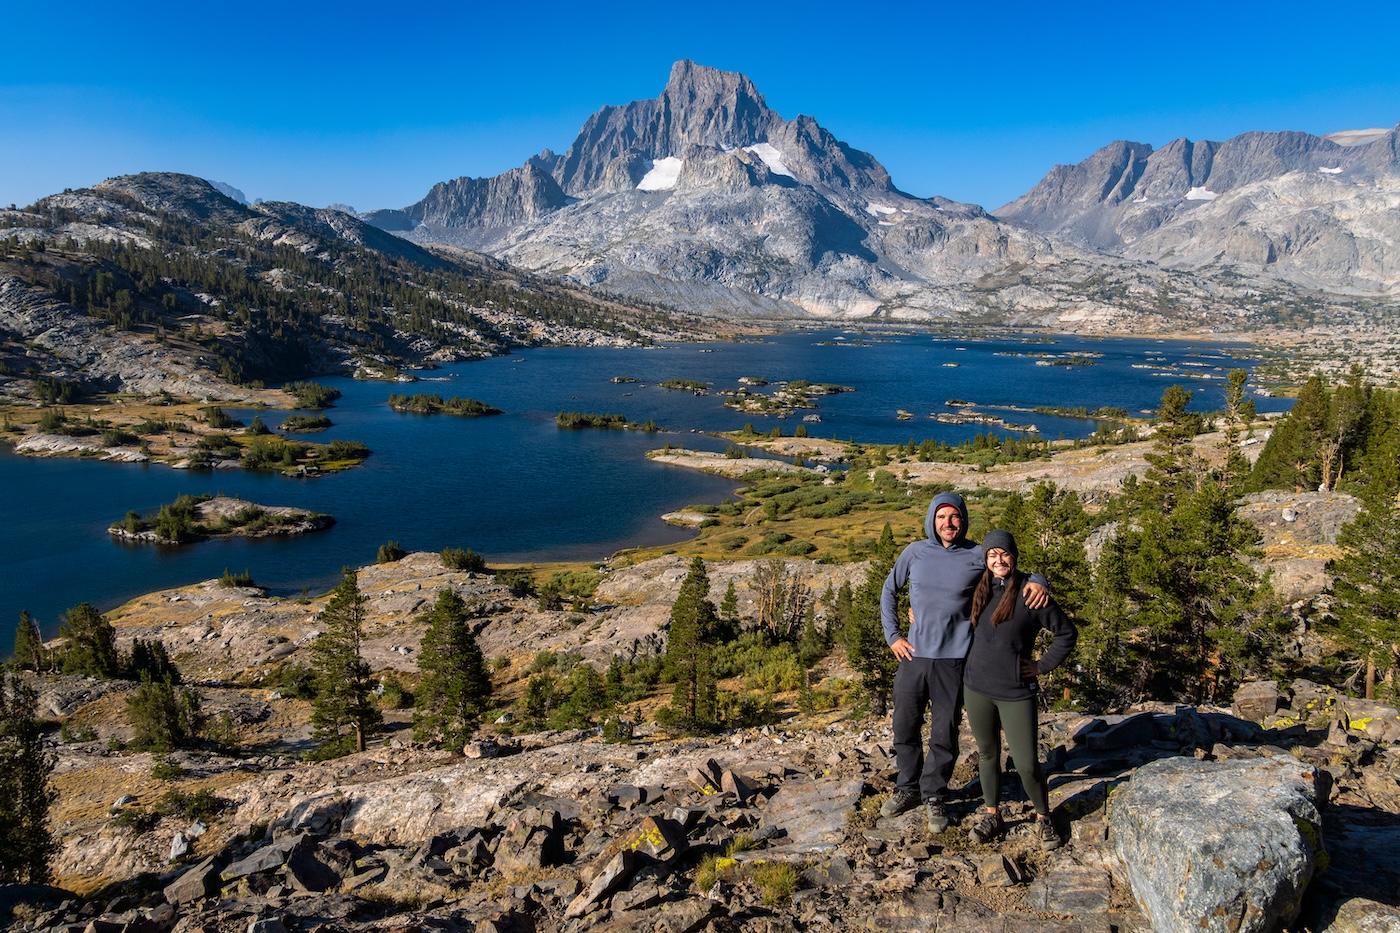 Brock Dallman and Sam Stych at Thousand Island Lake in the Sierras